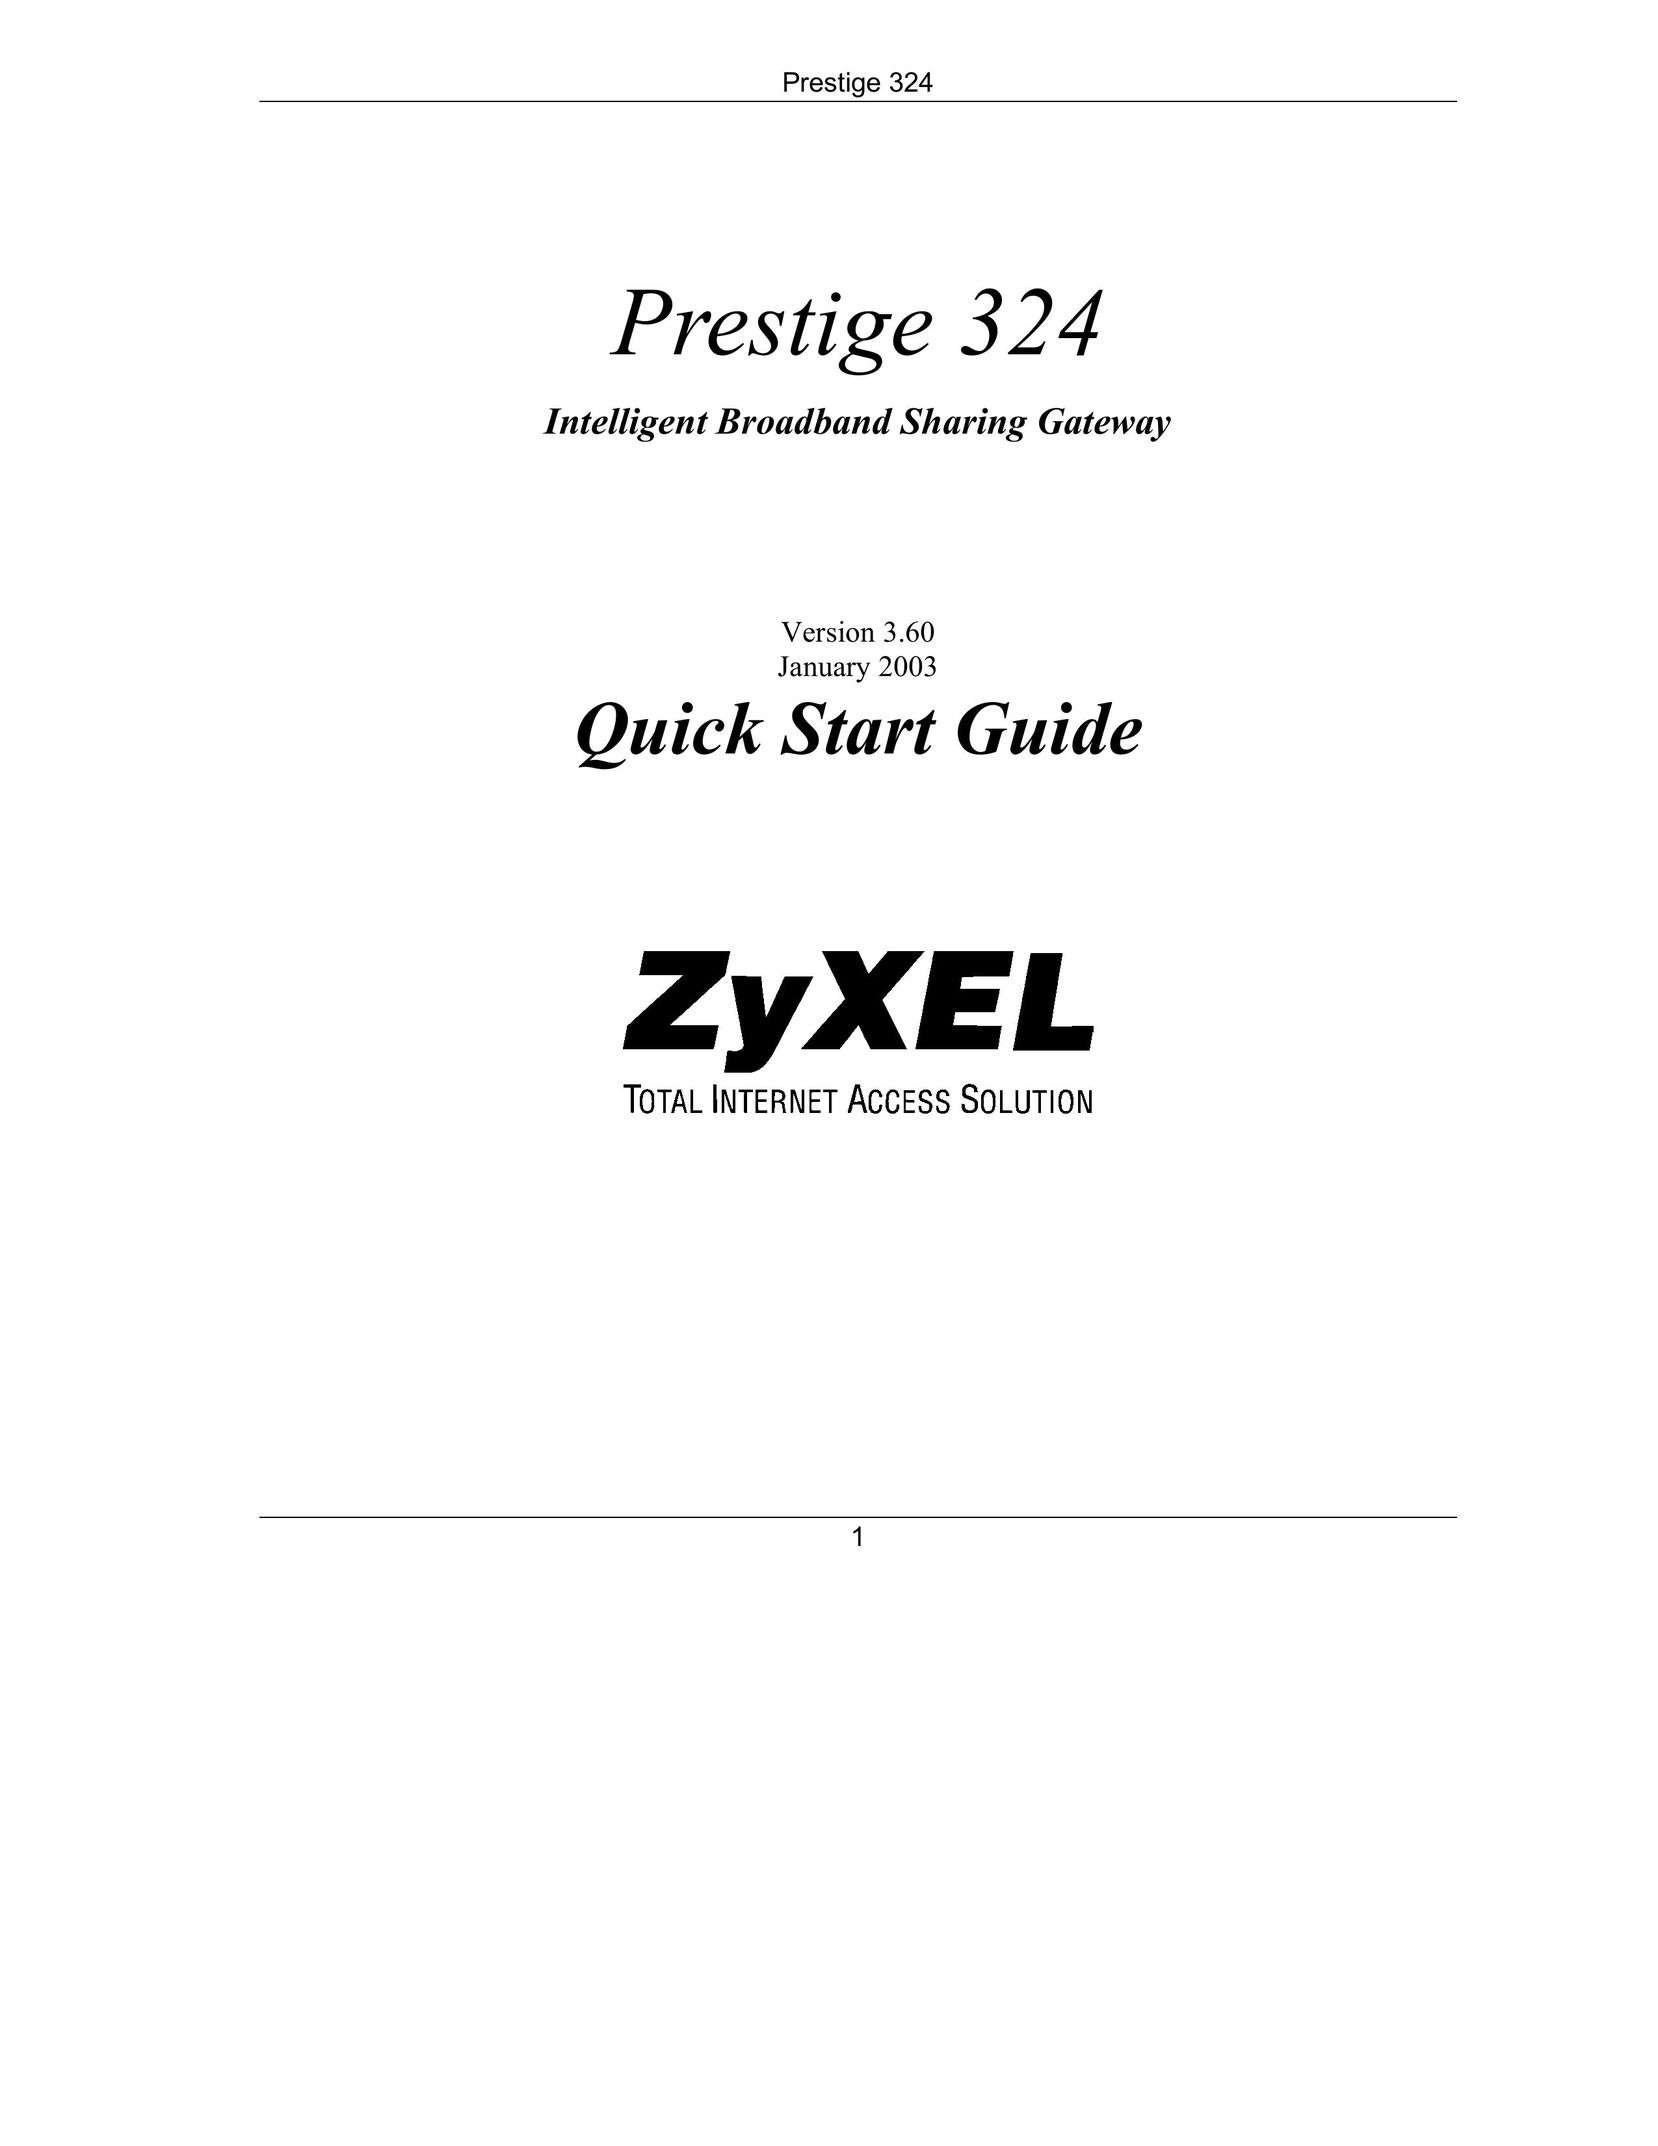 ZyXEL Communications 324 Network Router User Manual